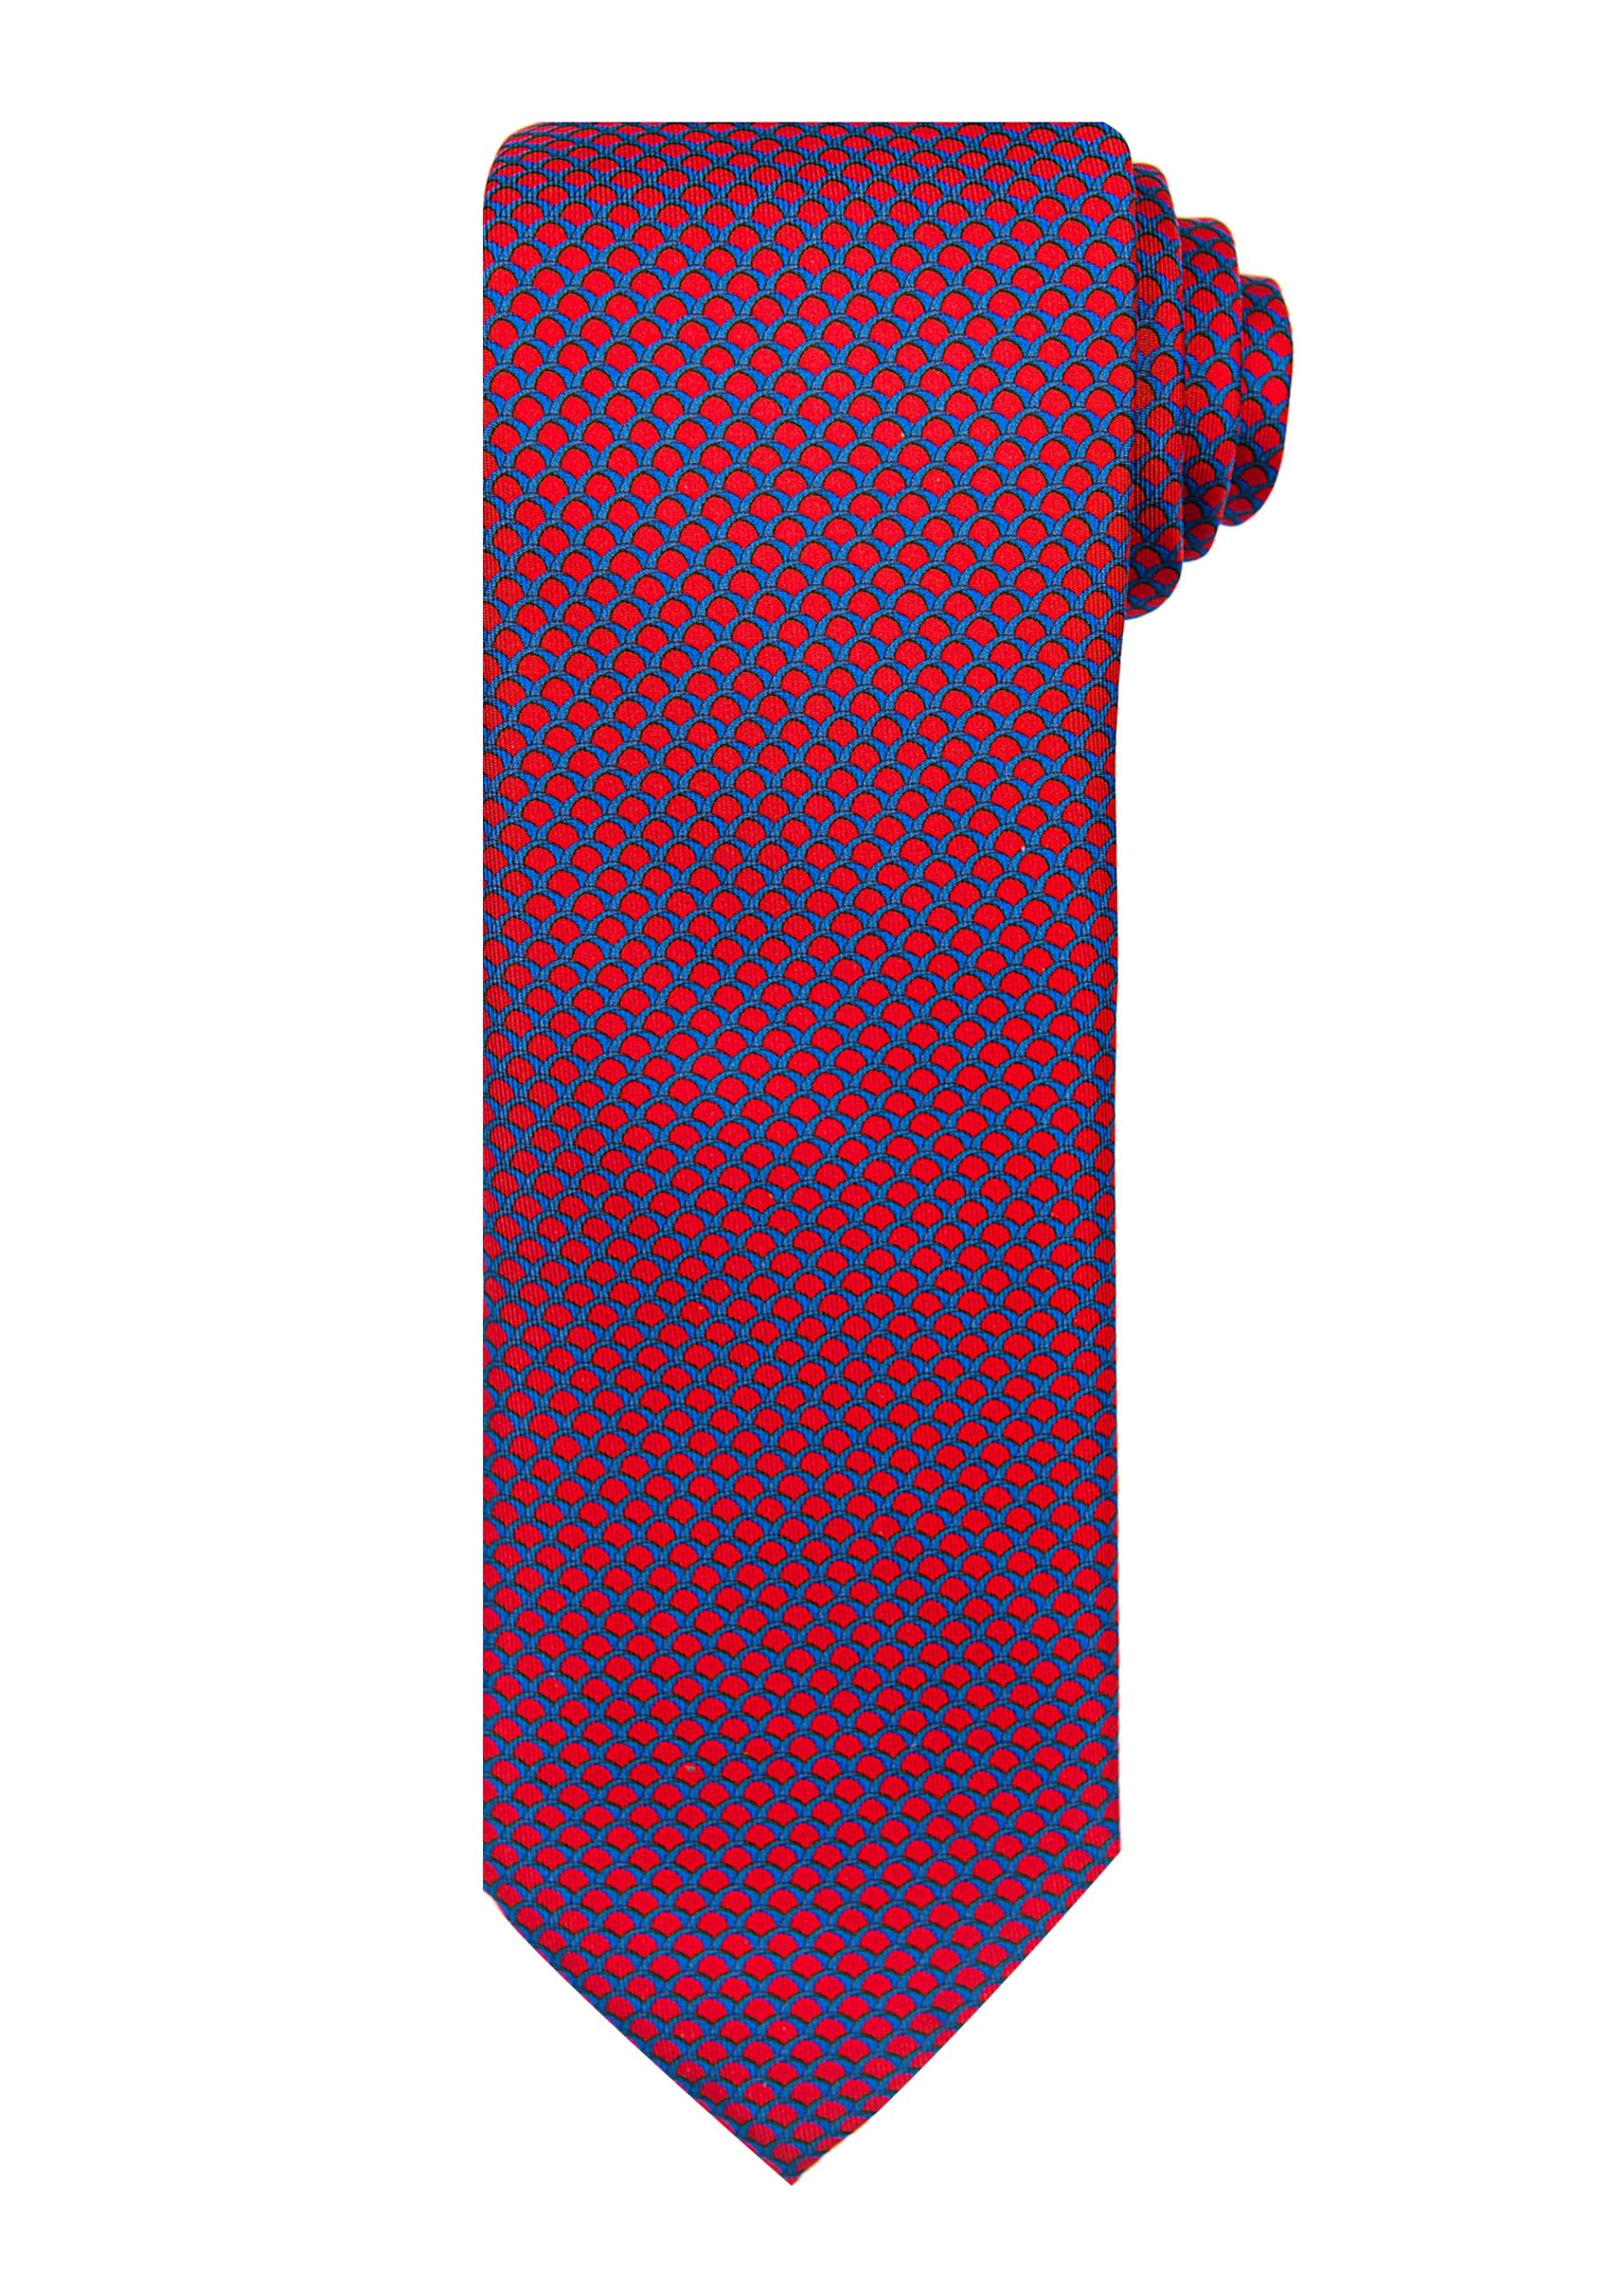 Roderick Charles honeycomb patterned tie in red and blue